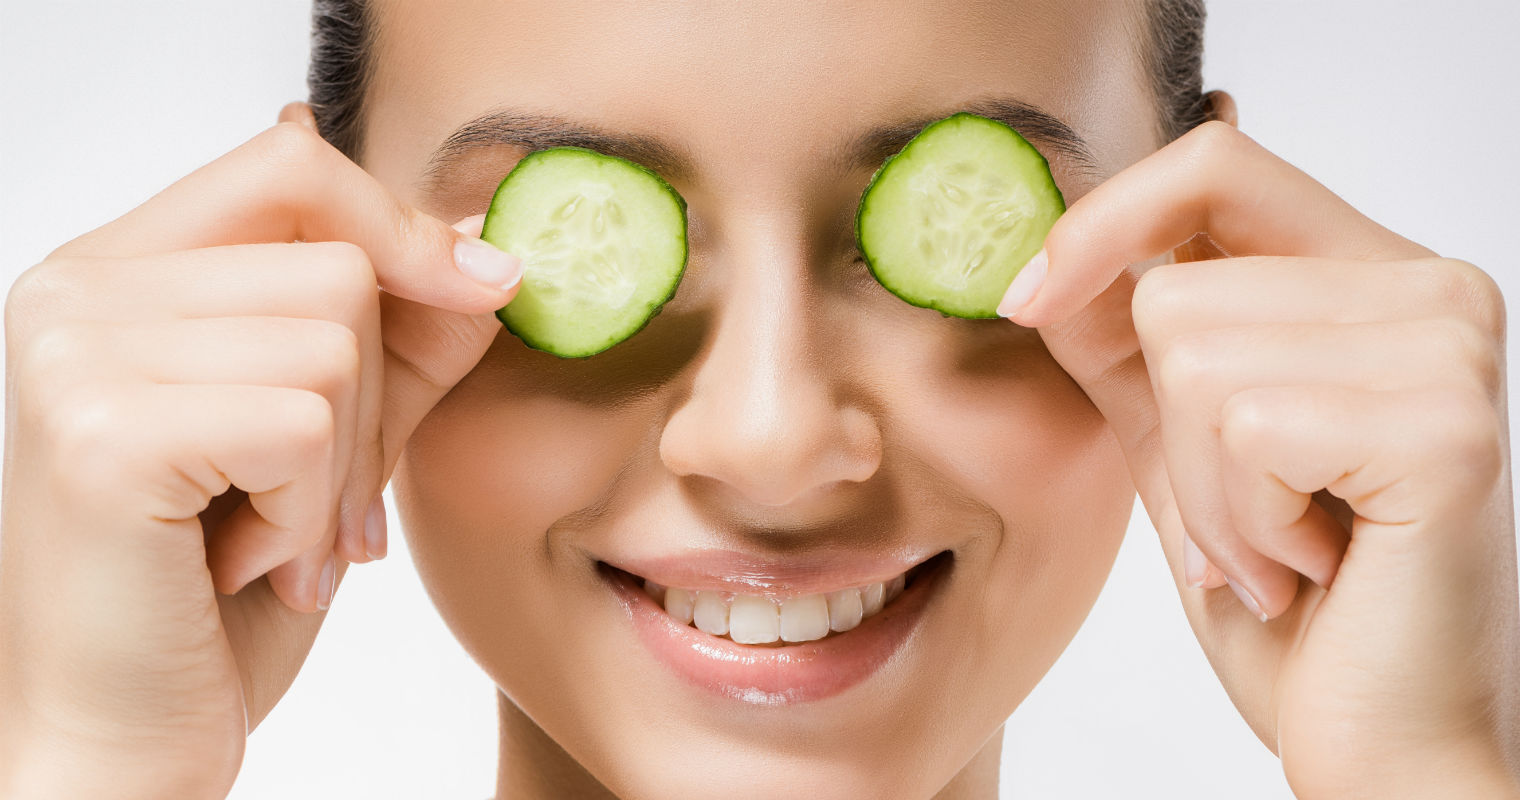 Cooling effects ofcucumber slices help reduce eye bags effectively.